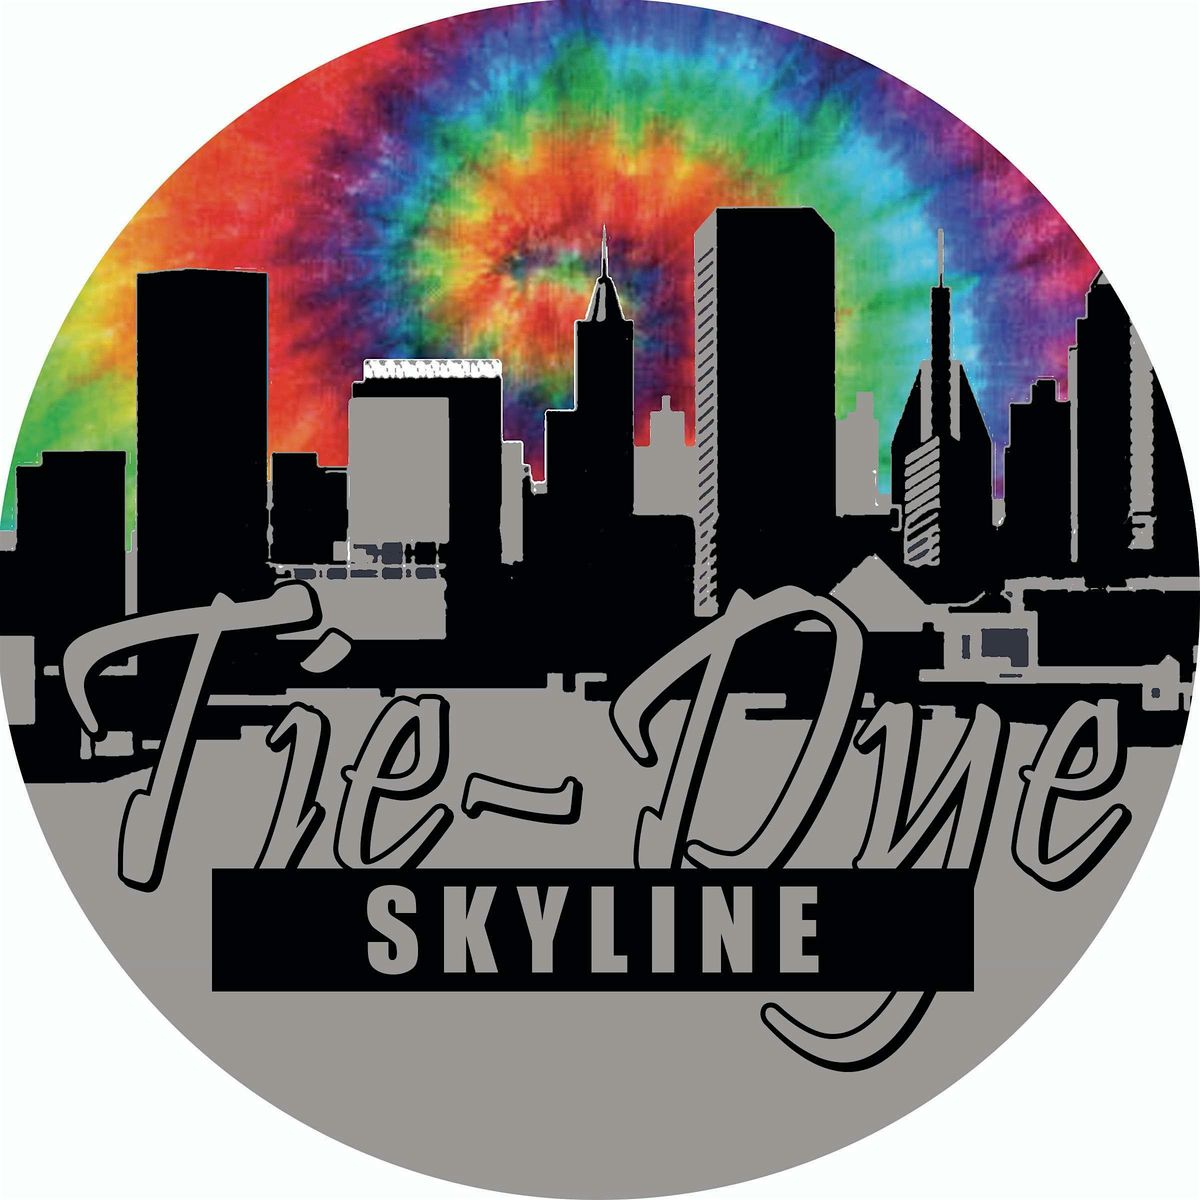 Tie-Dye Skyline with We Are Not Spies, Black Sevens, The Burns Doubts, Pike